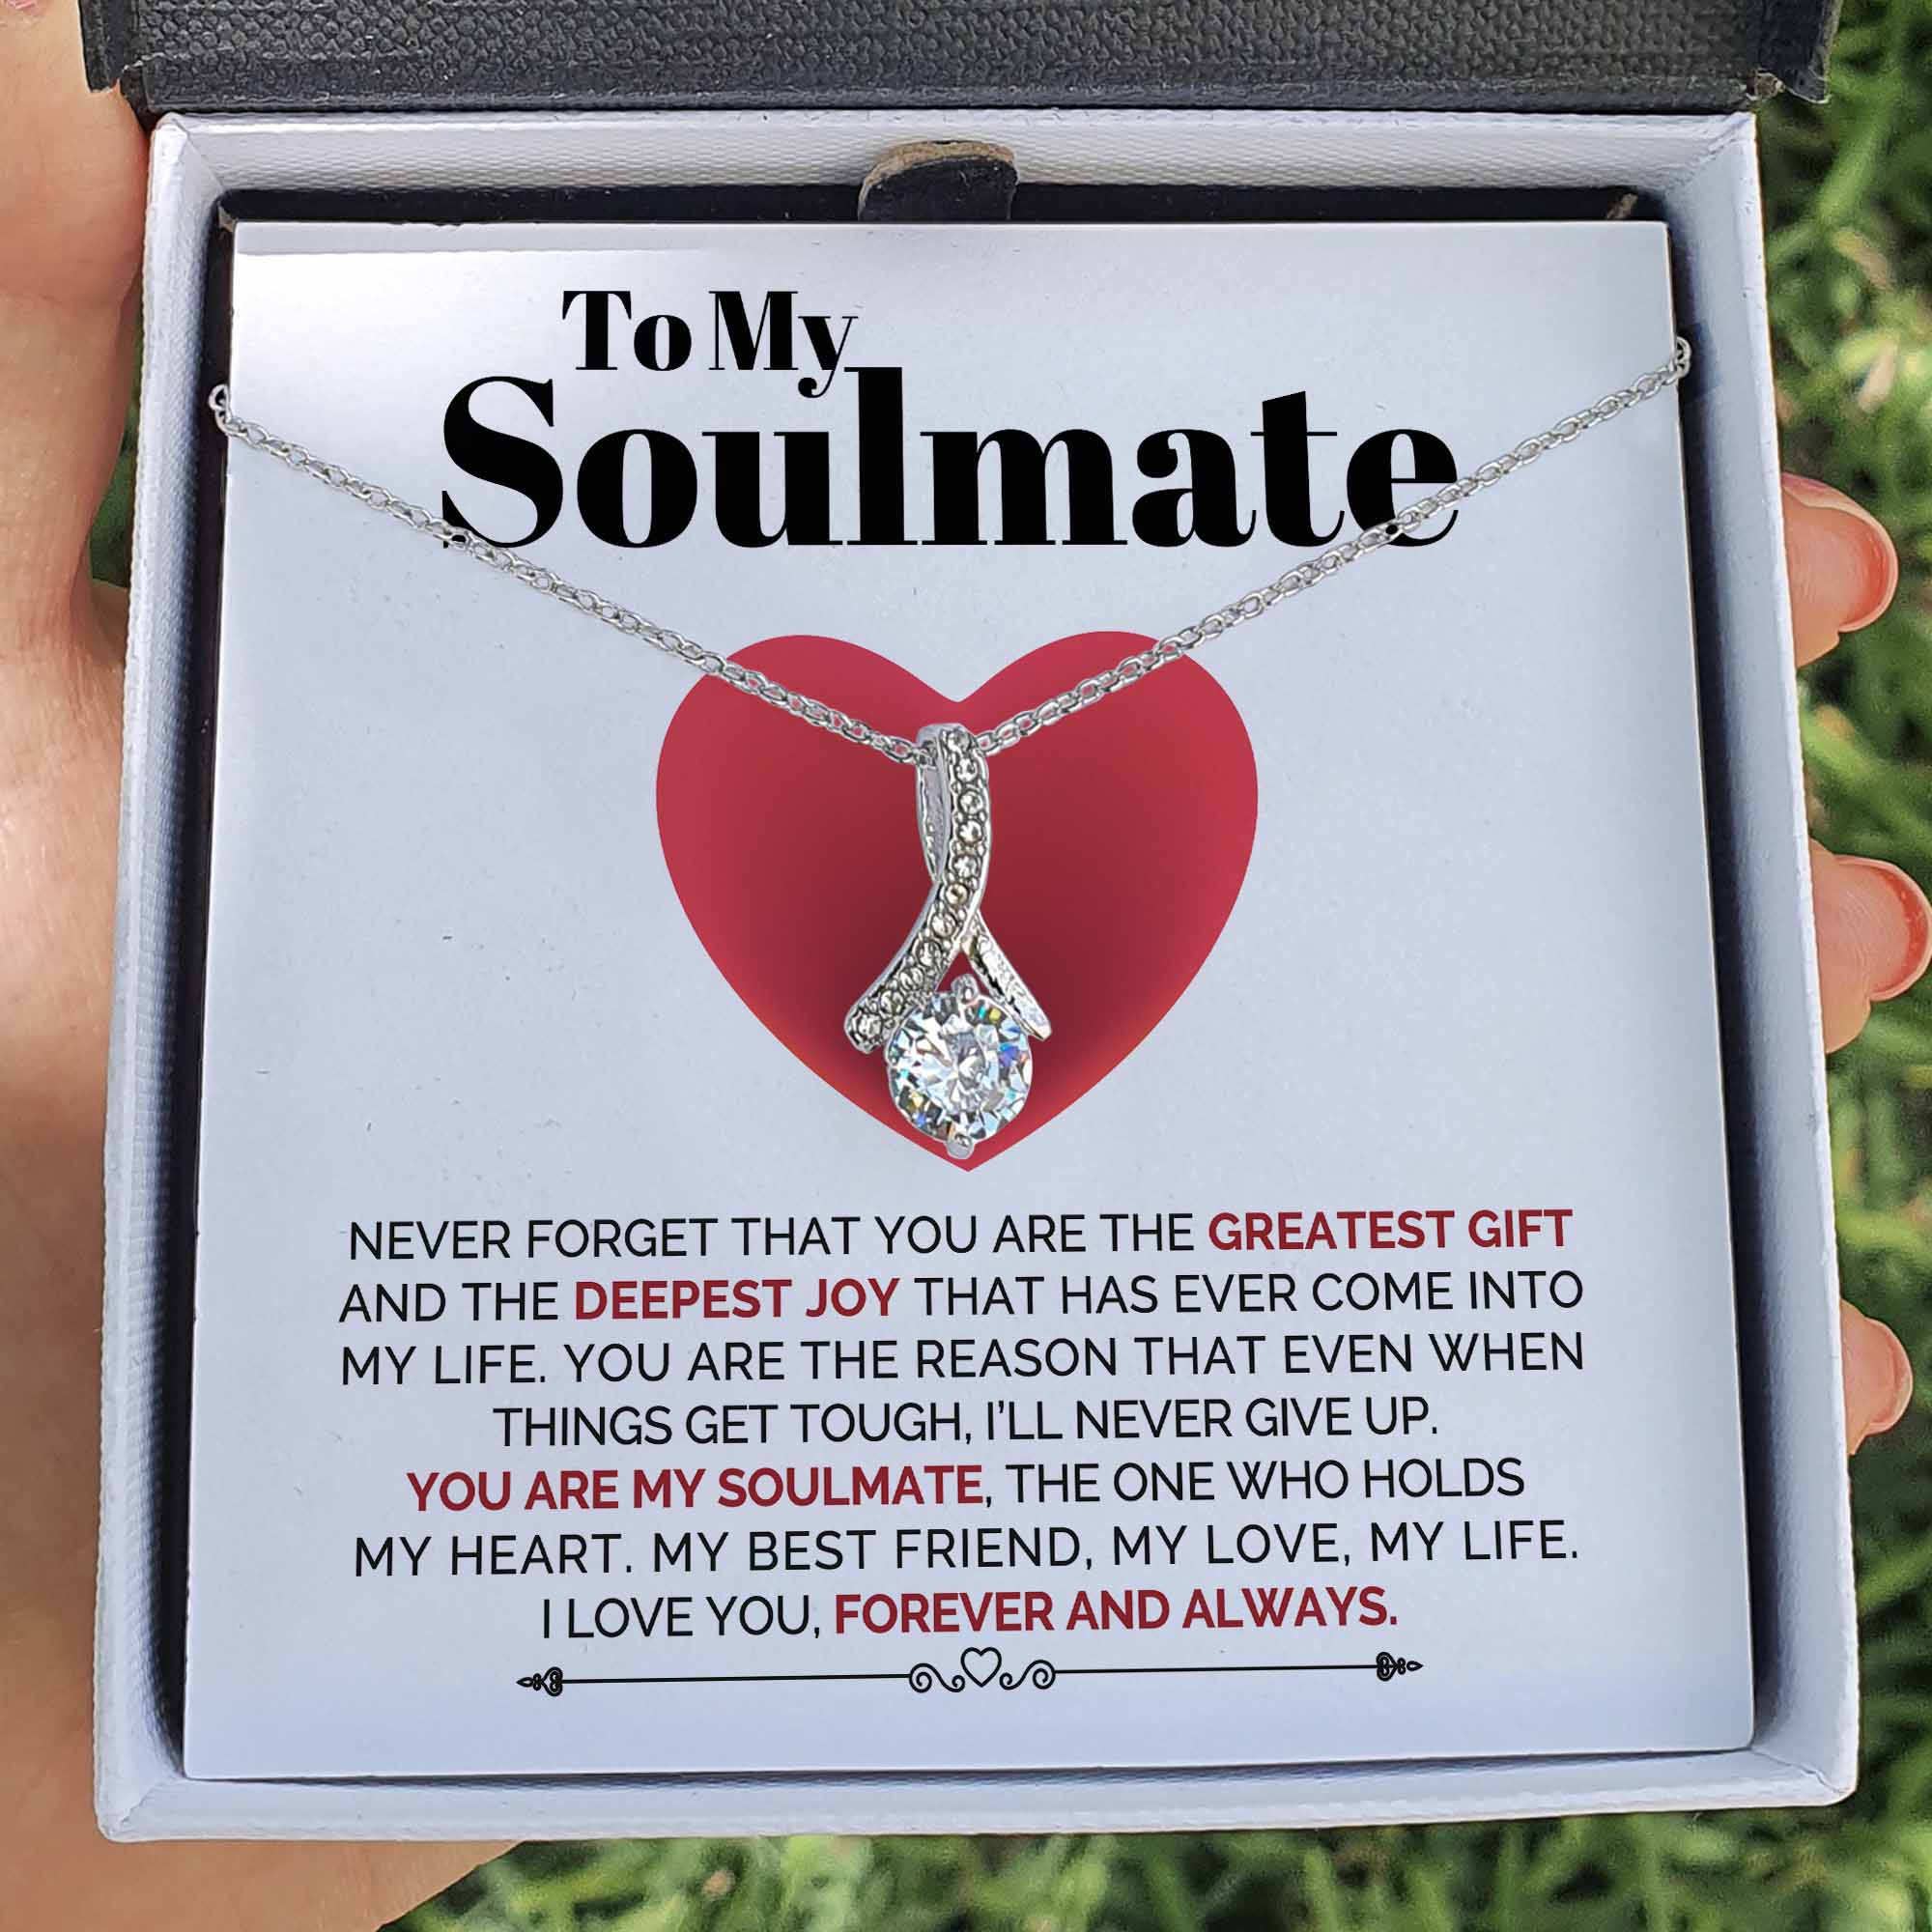 ShineOn Fulfillment Jewelry Standard Box To My Soulmate - My Love, My Life - Necklace